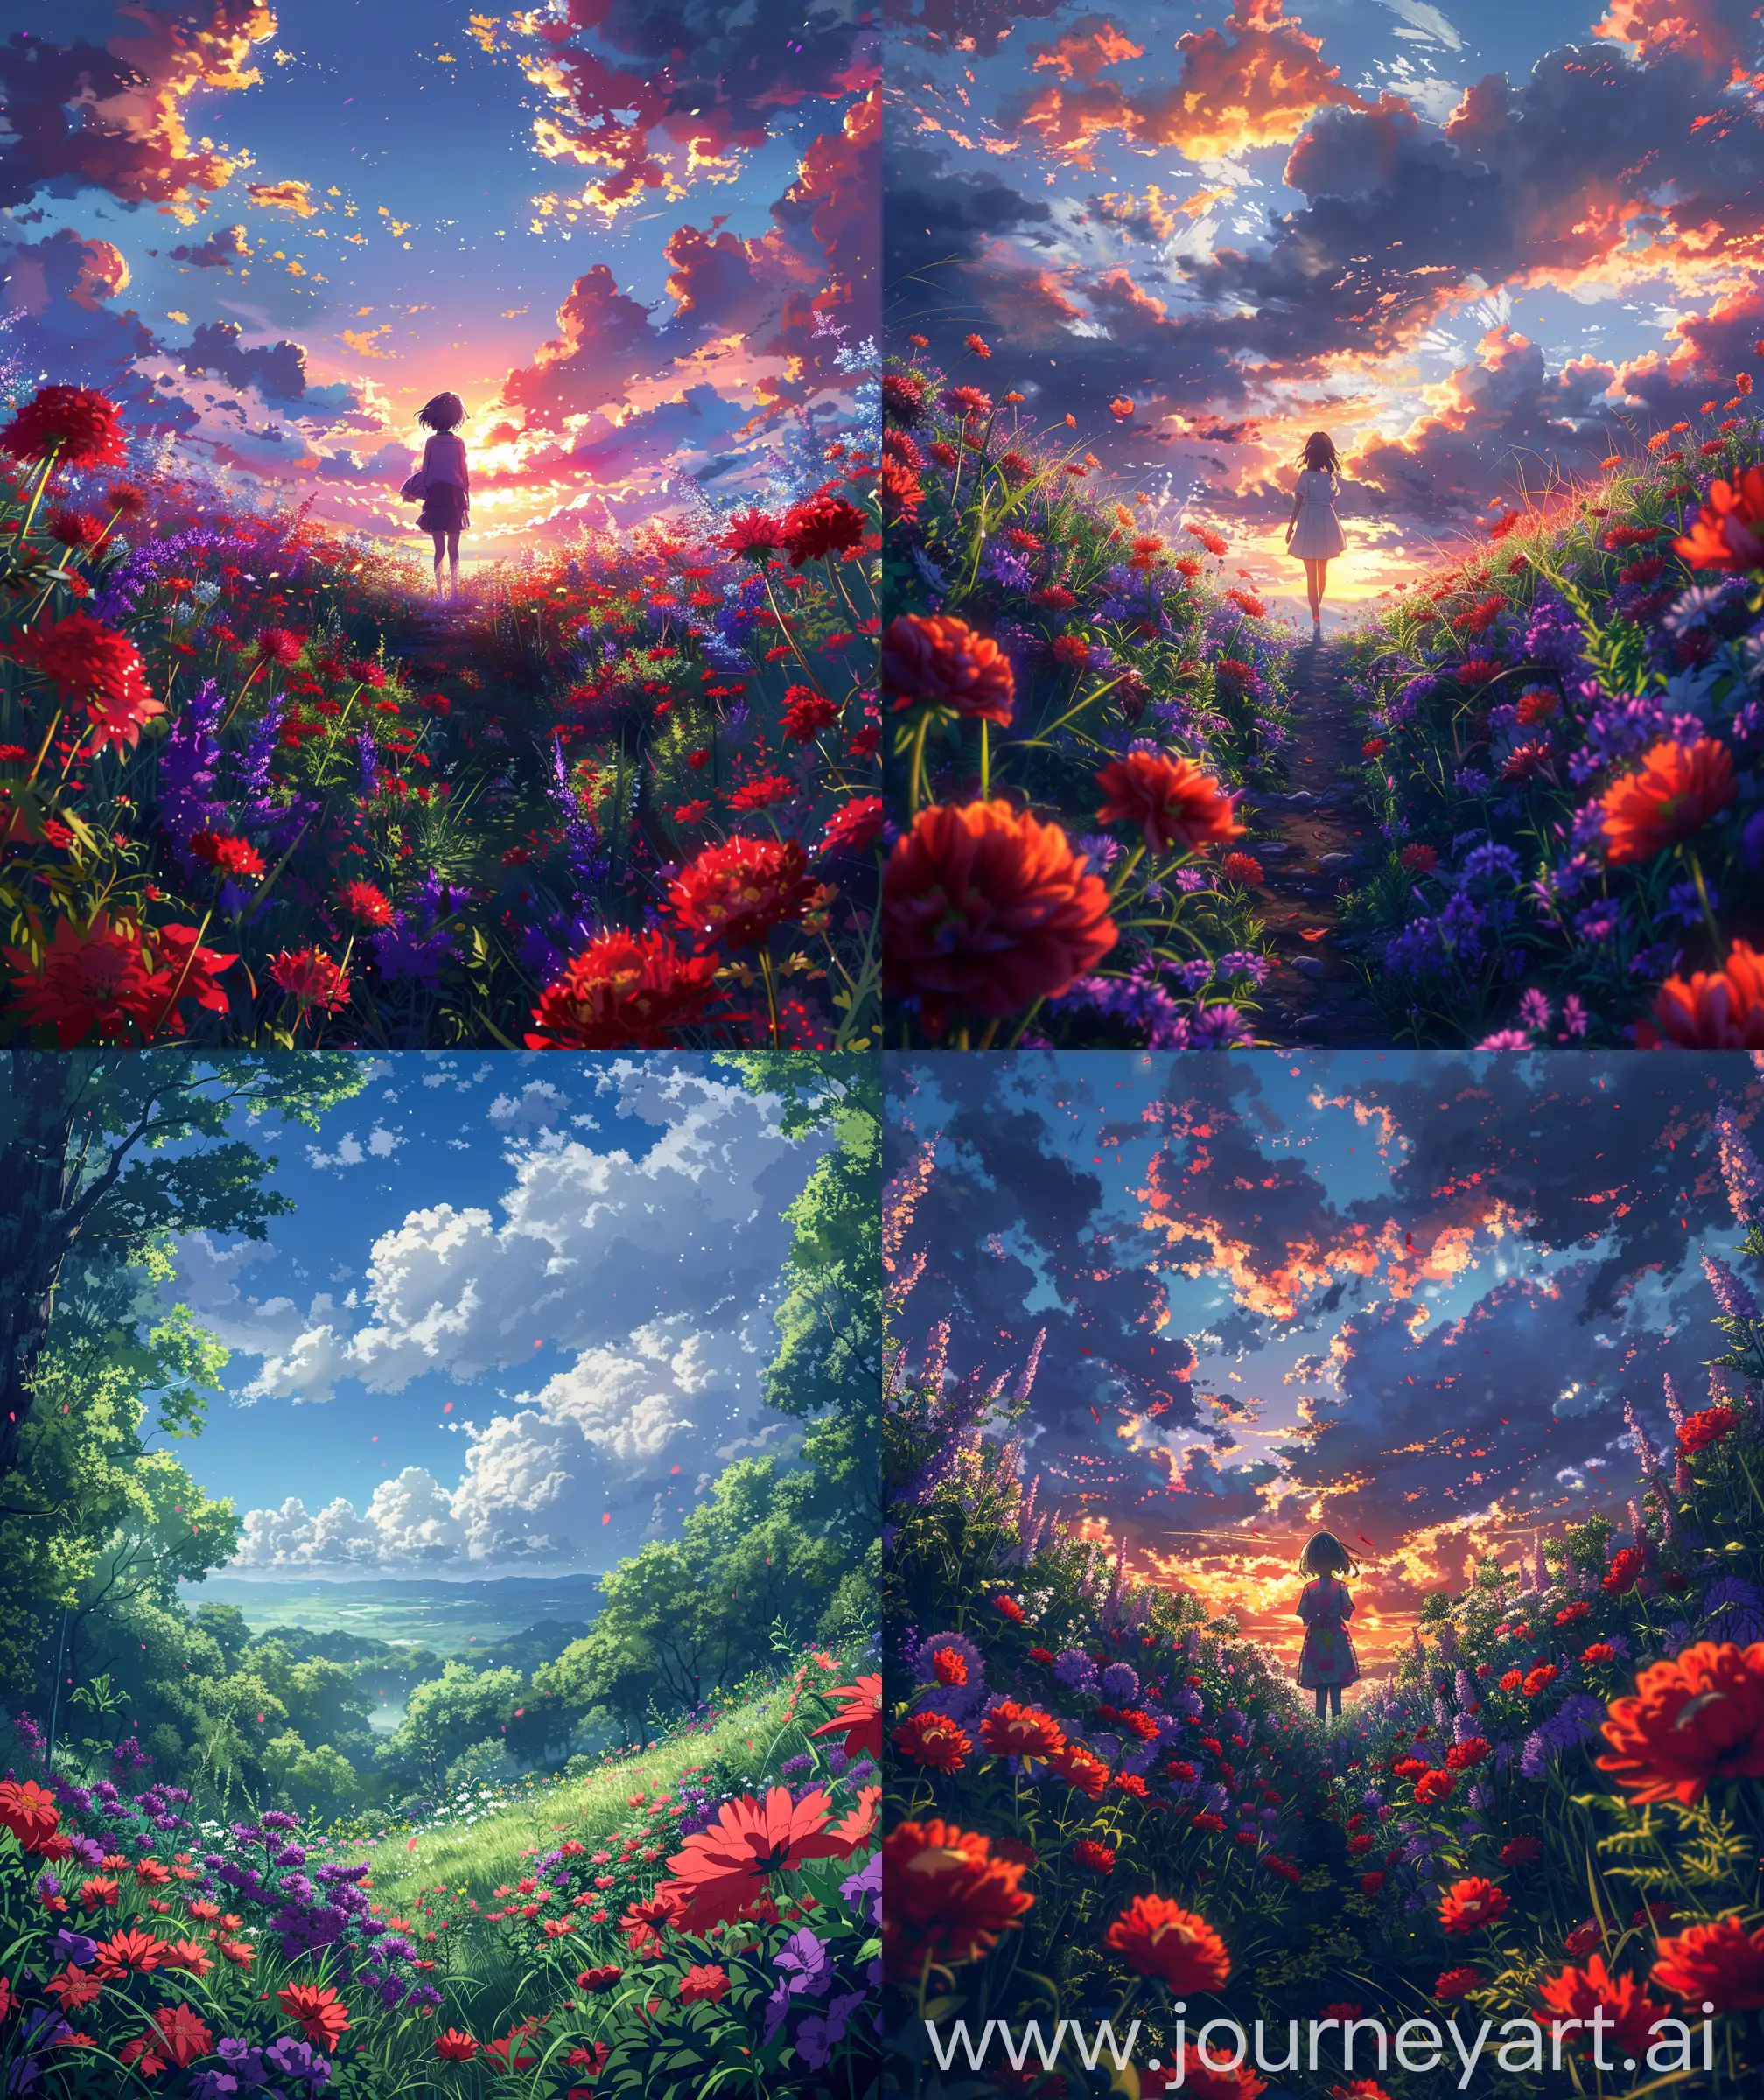 Anime scenary, illustration, mokoto shinkai and Ghibli style mix, direct front facade view of childhood memories with nature view, playful, flowers, summer, morning sky, red and purple colour flowers, ultra HD, high quality, sharp details, no hyperrealistic --ar 27:32 --s 400 